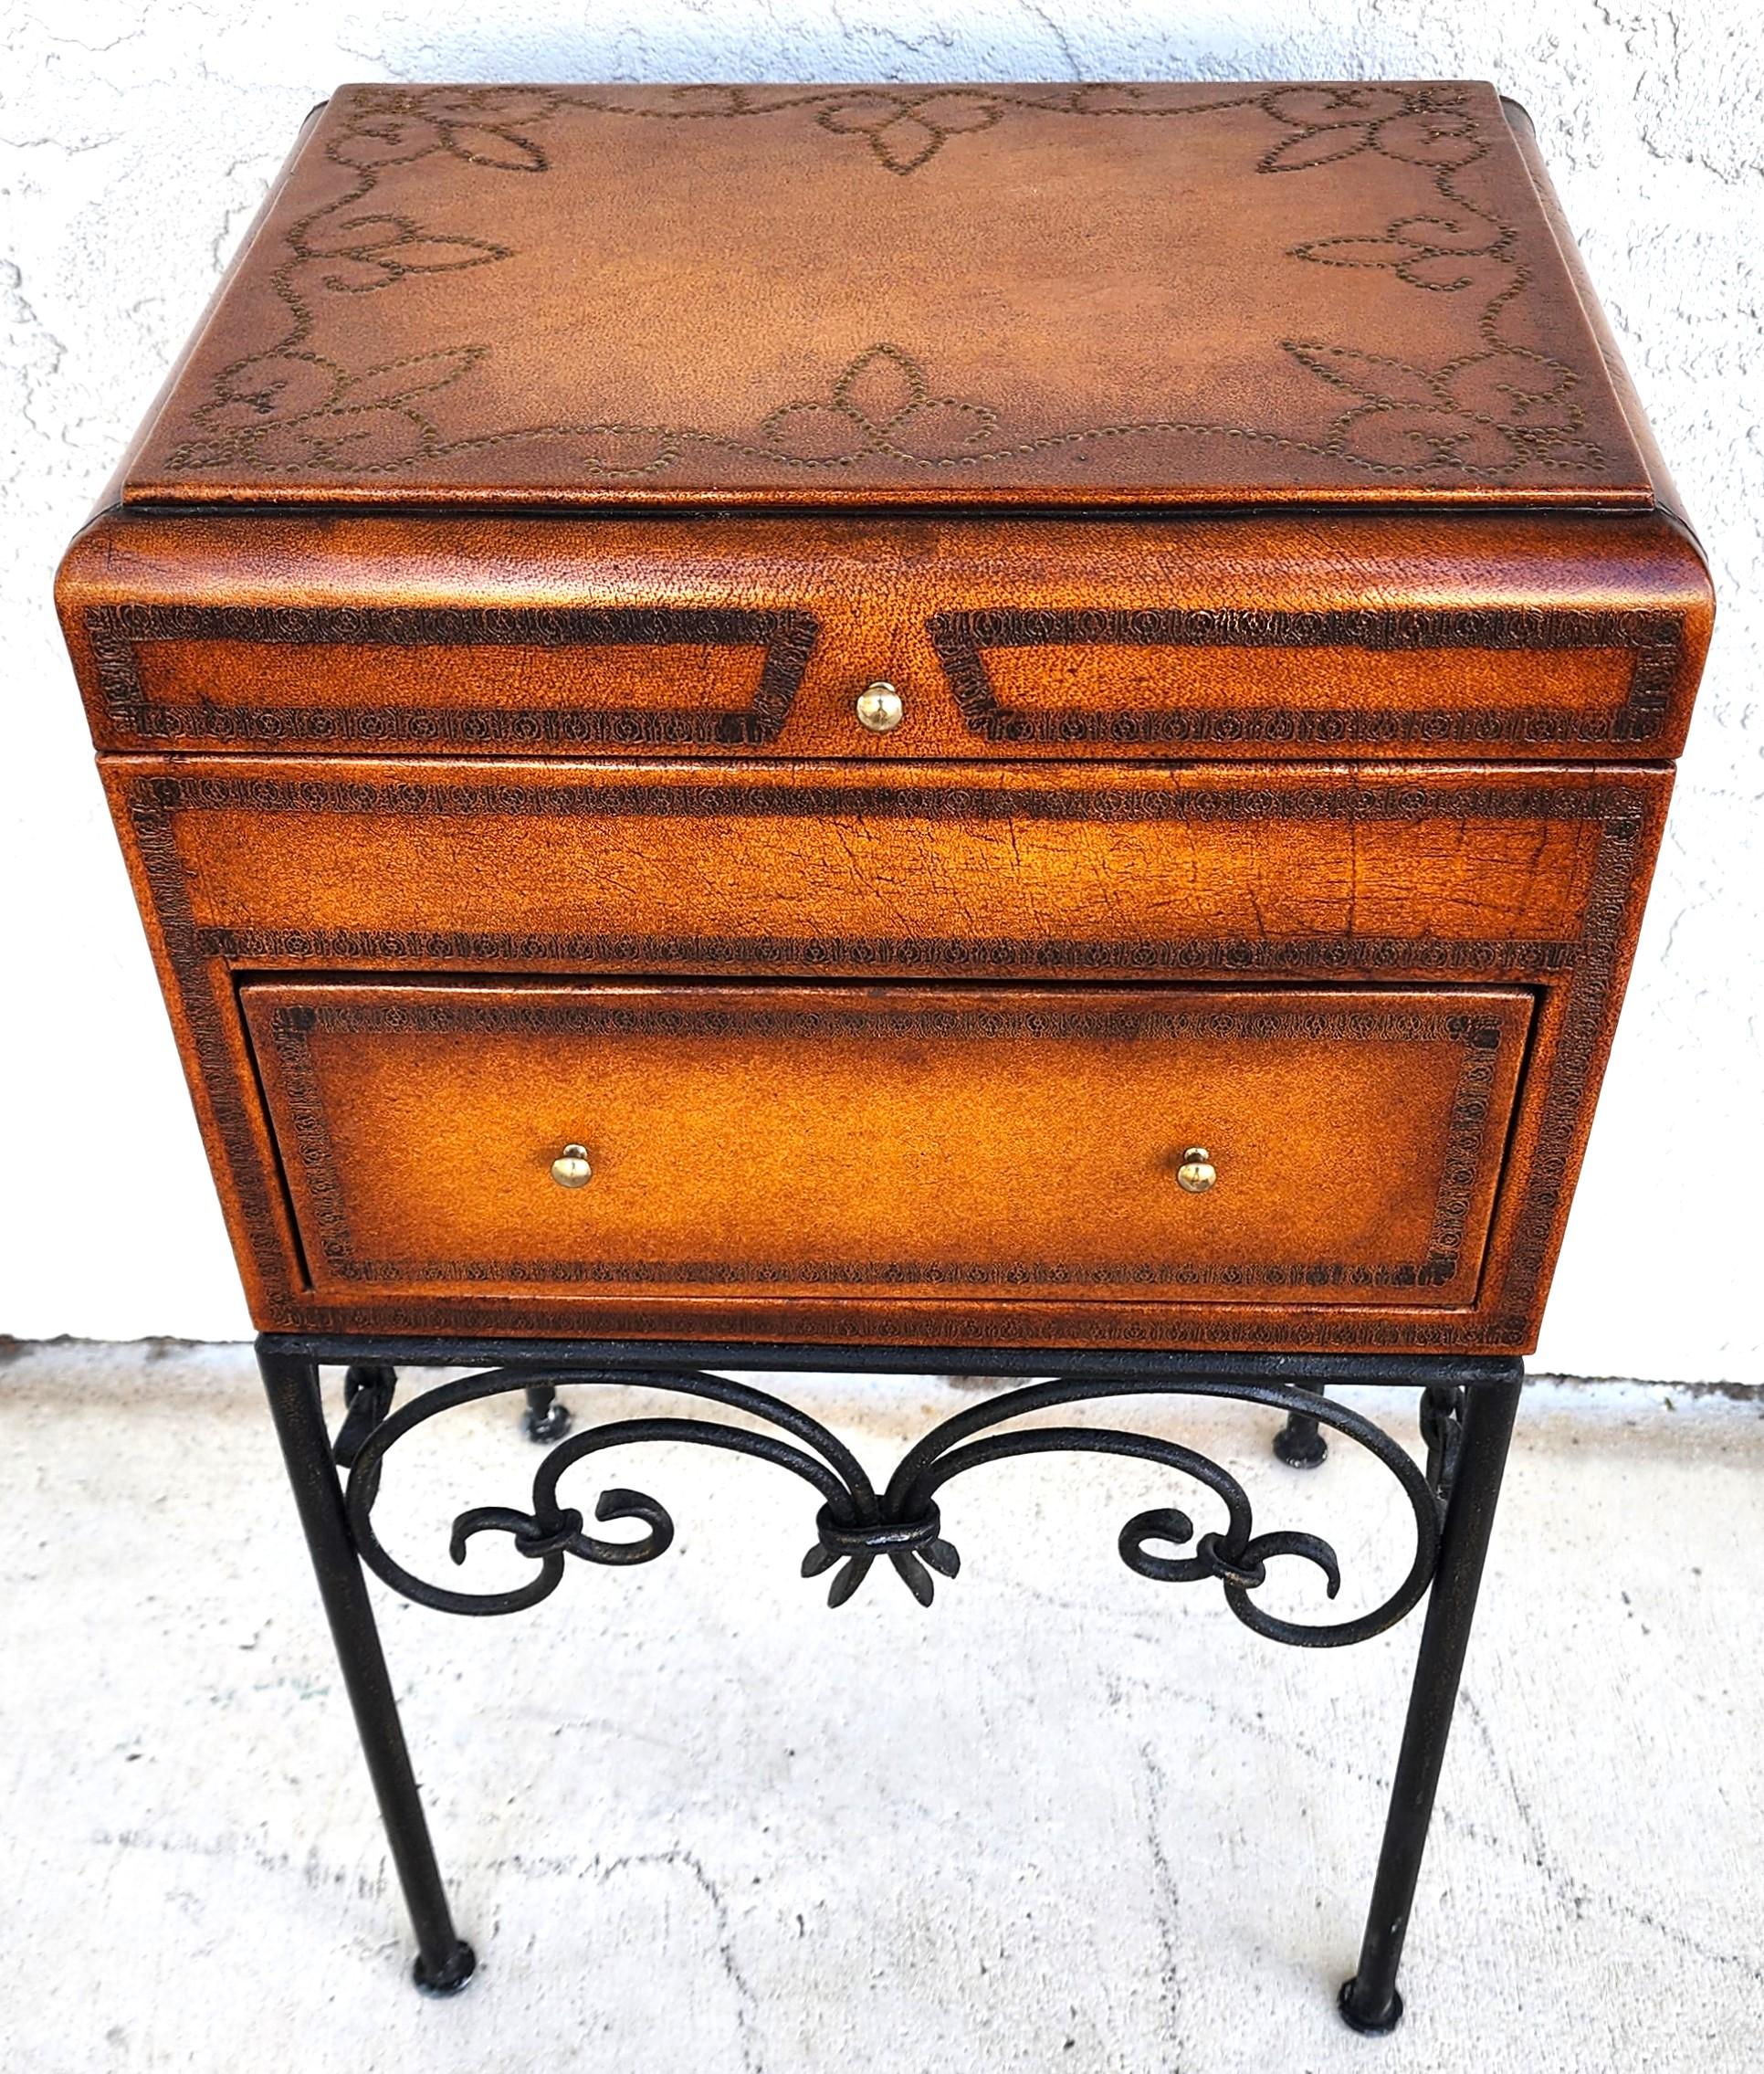 For FULL item description click on CONTINUE READING at the bottom of this page.

Offering One Of Our Recent Palm Beach Estate Fine Furniture Acquisitions Of A
Italian Tooled Leather Wrapped Flip-Top Box Table with Wrought Iron base, Brass Moriage